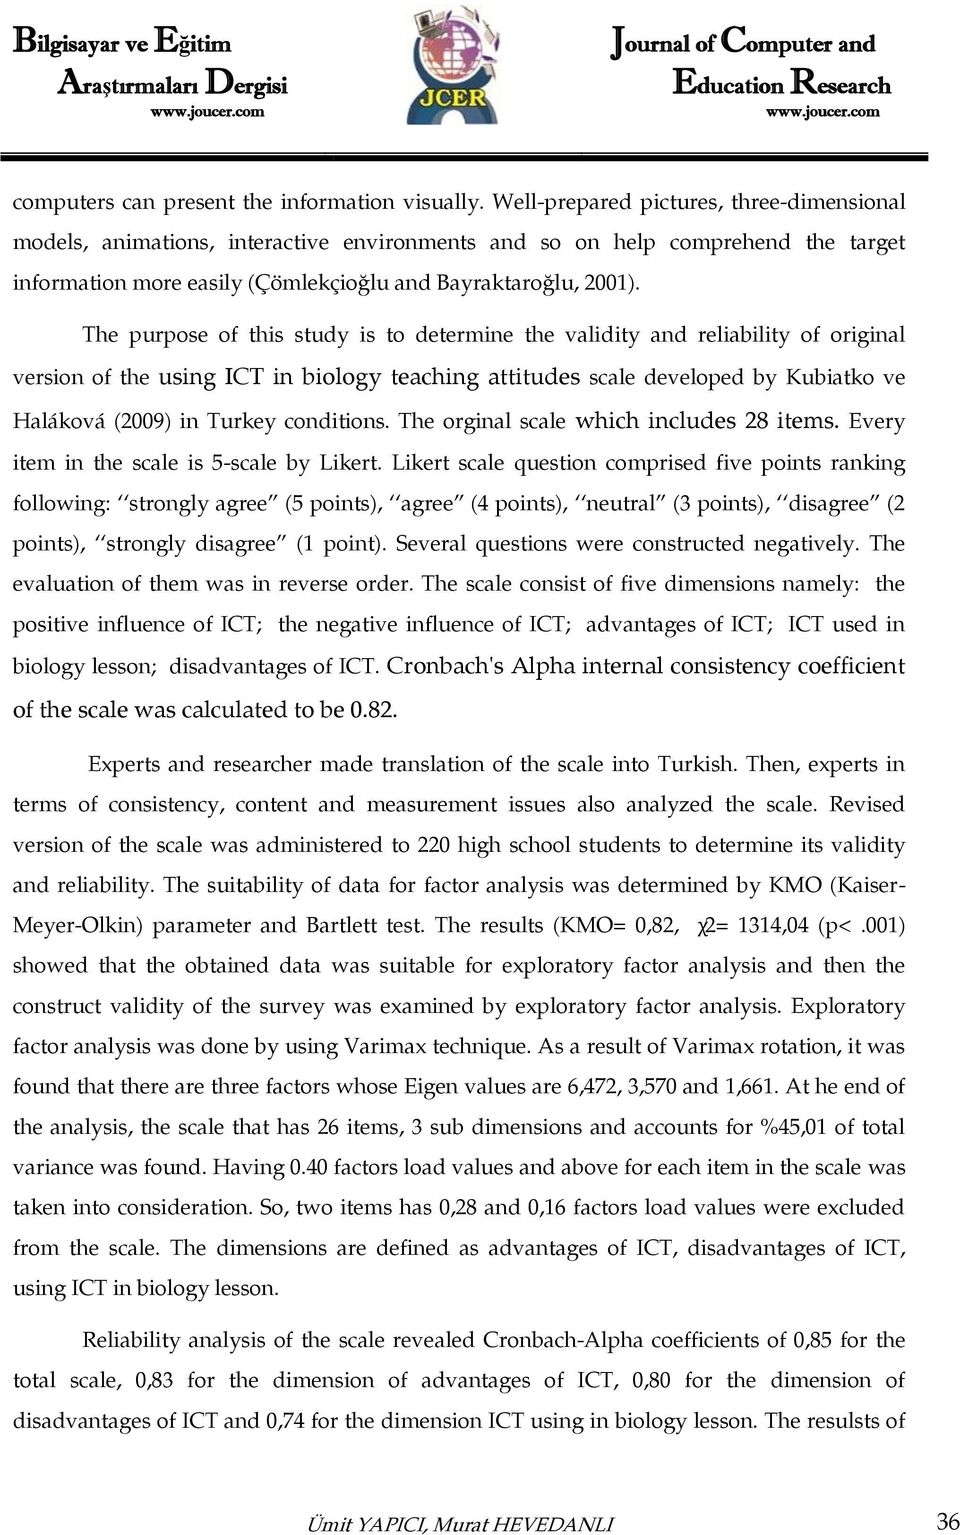 The purpose of this study is to determine the validity and reliability of original version of the using ICT in biology teaching attitudes scale developed by Kubiatko ve Haláková (2009) in Turkey